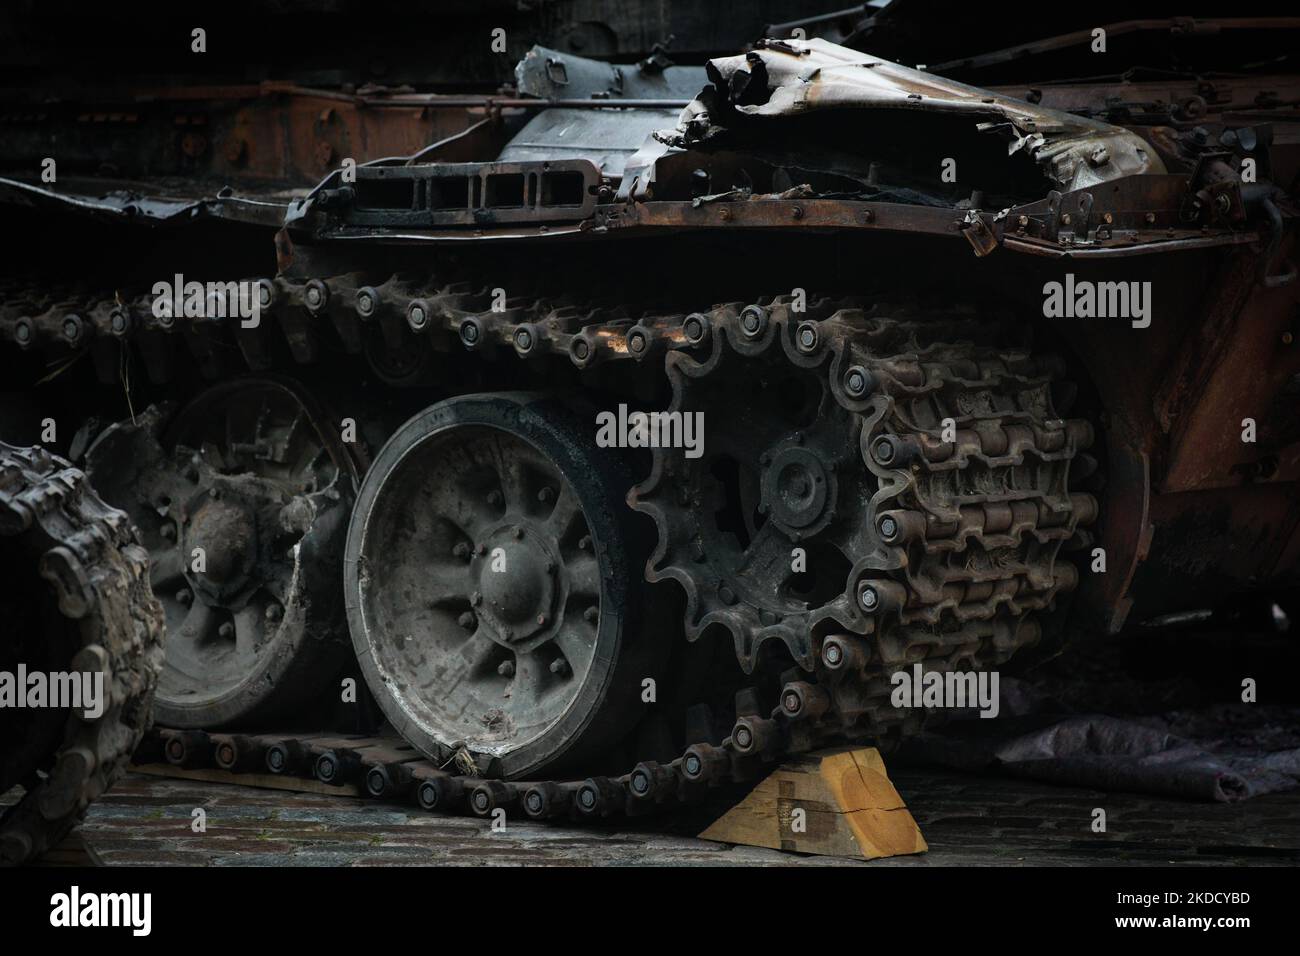 Detail of damage of a Russian tank is seen near the Royal Castle in Warsaw, Poland on 28 June, 2022. Two destroyed Russian army tanks are on display on the Castle Square in the Old Town after having been transported from Ukraine. One of the tanks, a T-72 was destroyed in the Bucha district near Kyiv where in march the Russian army committed mass executions of civilians. The second tank on display is a 2S19 Msta self-propelled Howitzer weighing around 42 thousand kilos. (Photo by STR/NurPhoto) Stock Photo